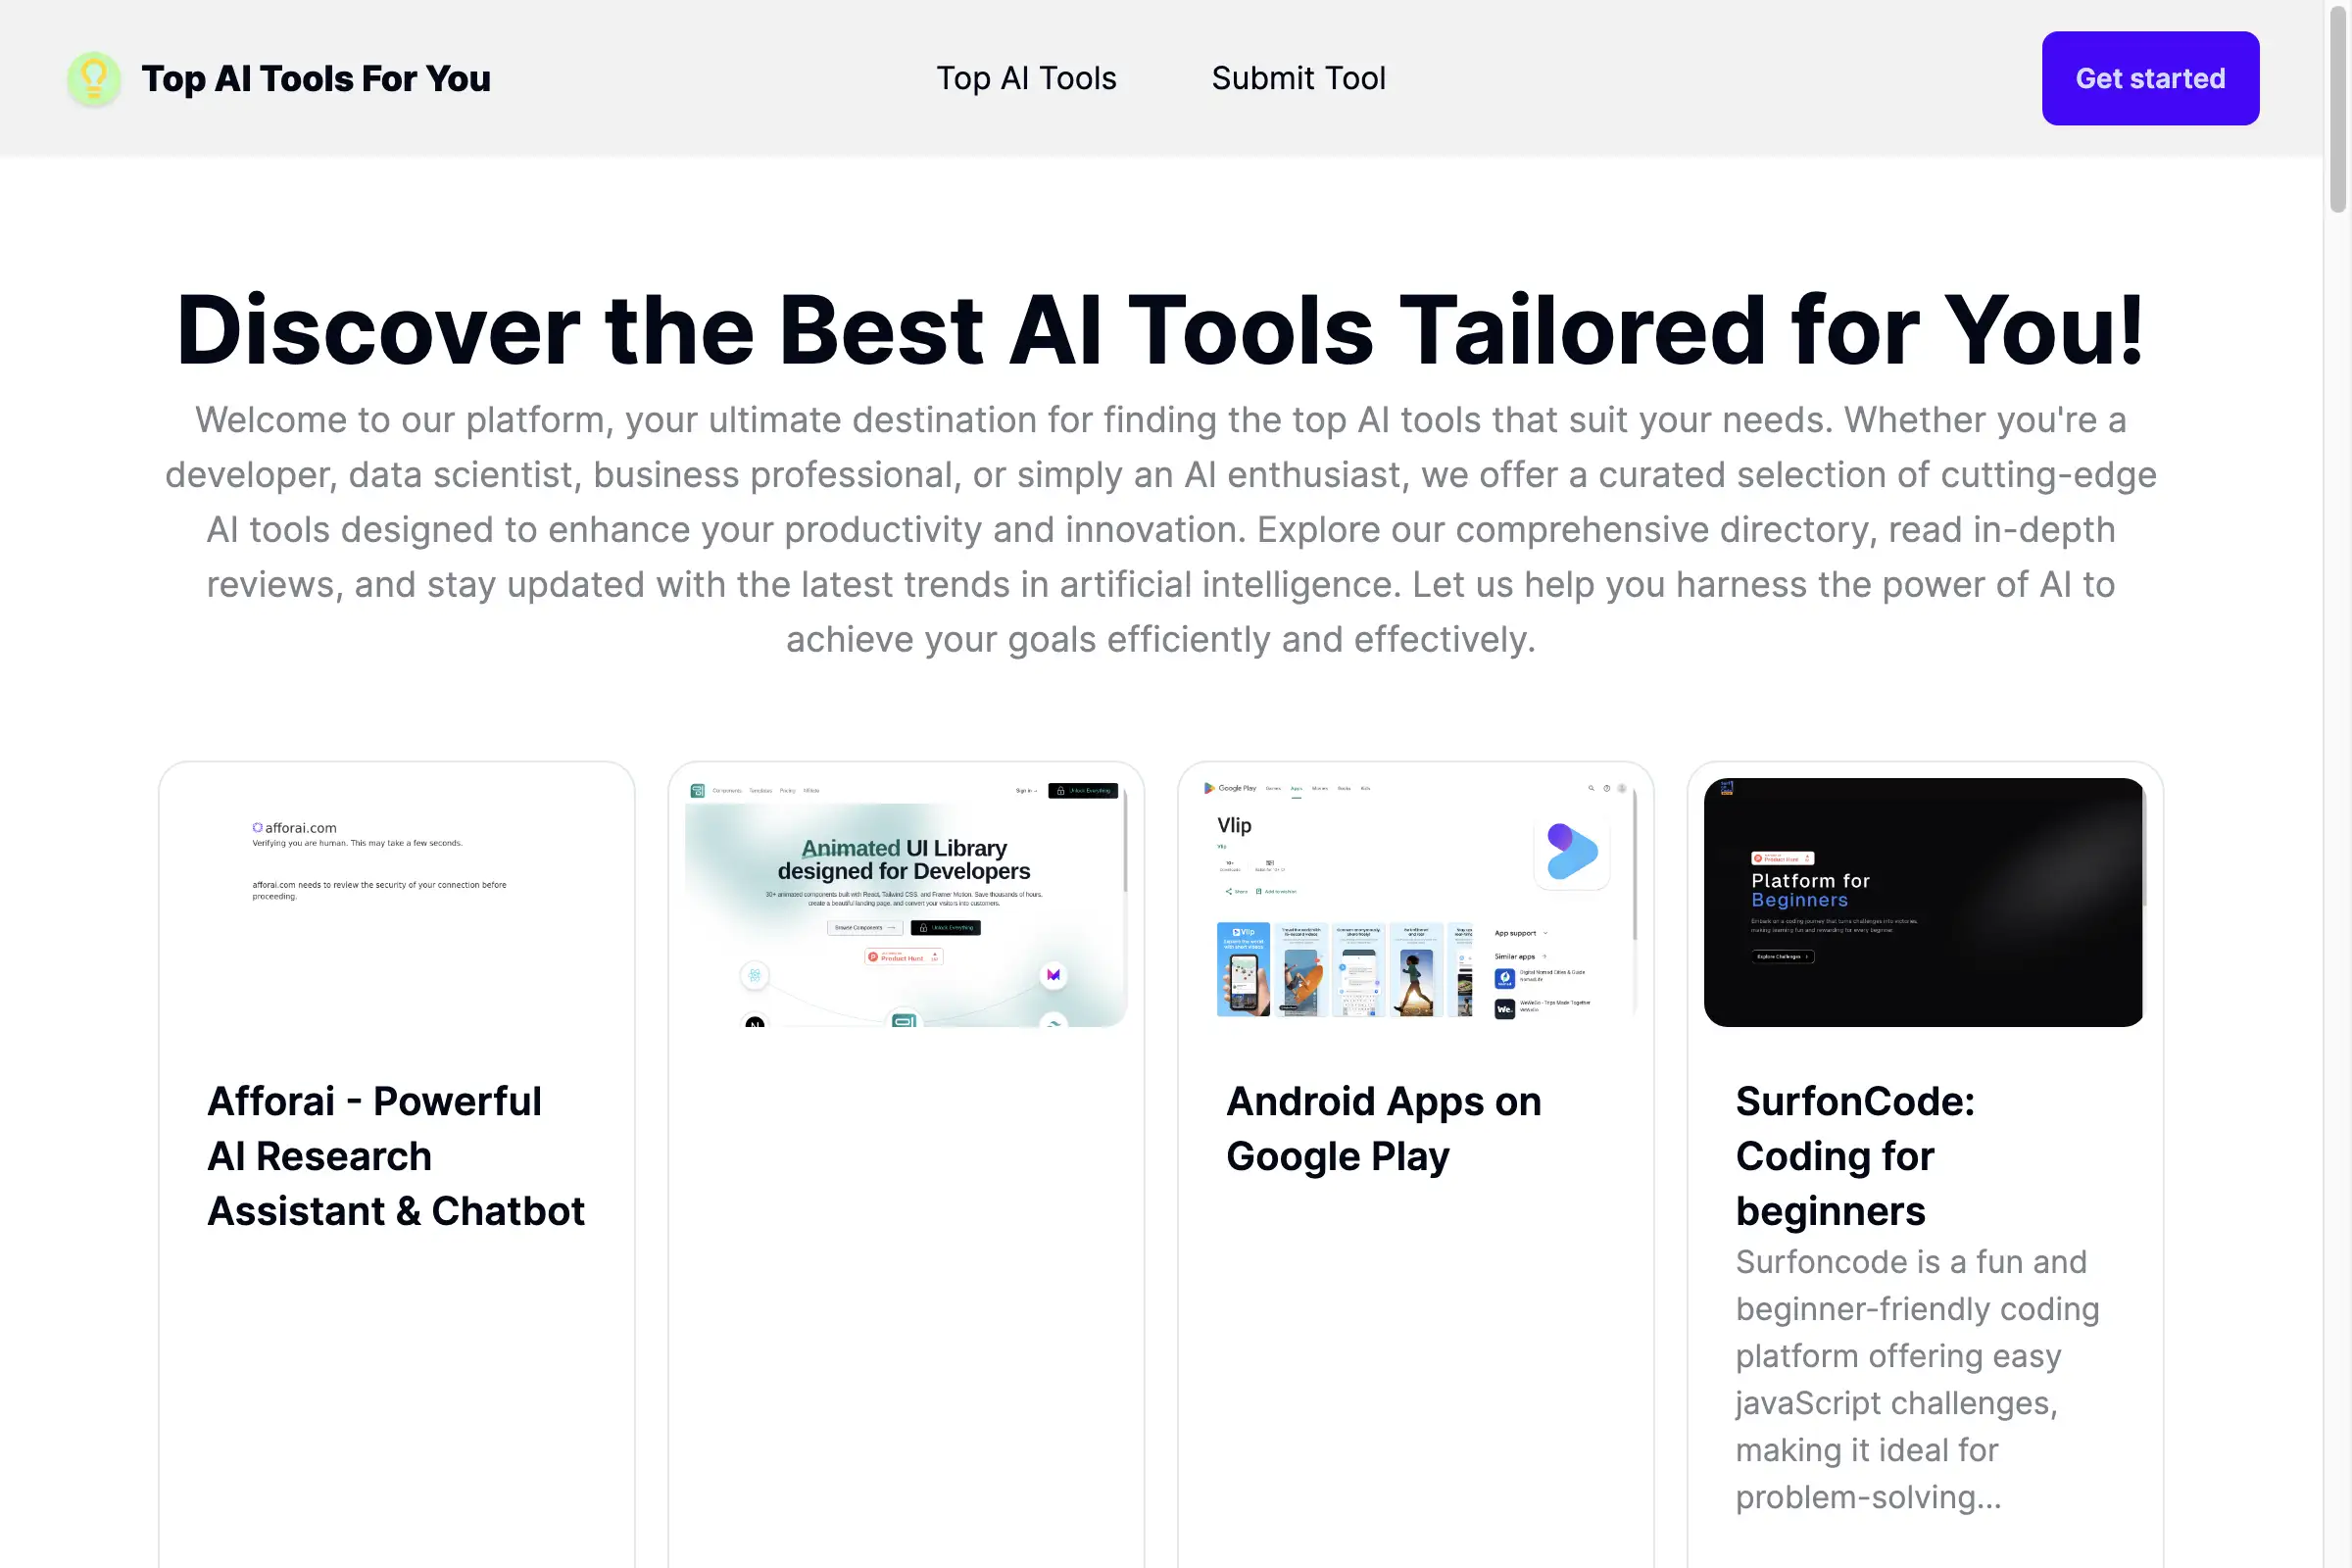 Top AI Tools For You